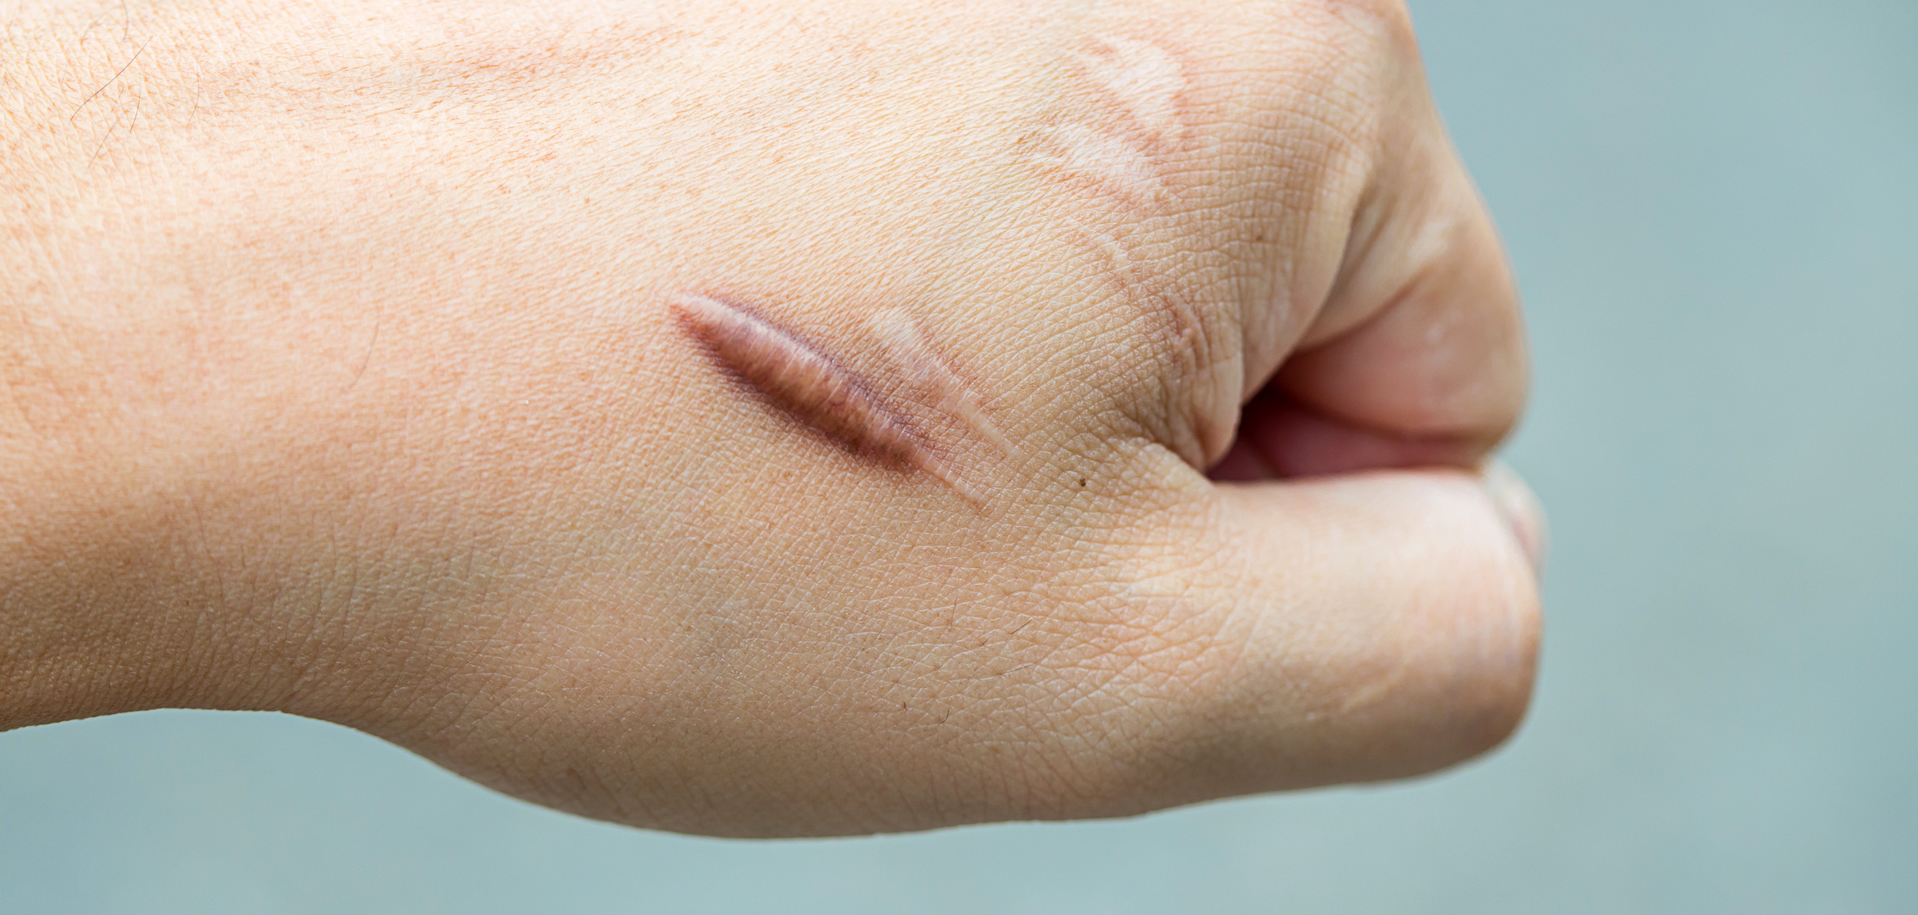 Keloid scar (Hypertrophic Scar) on man hand skin after accident